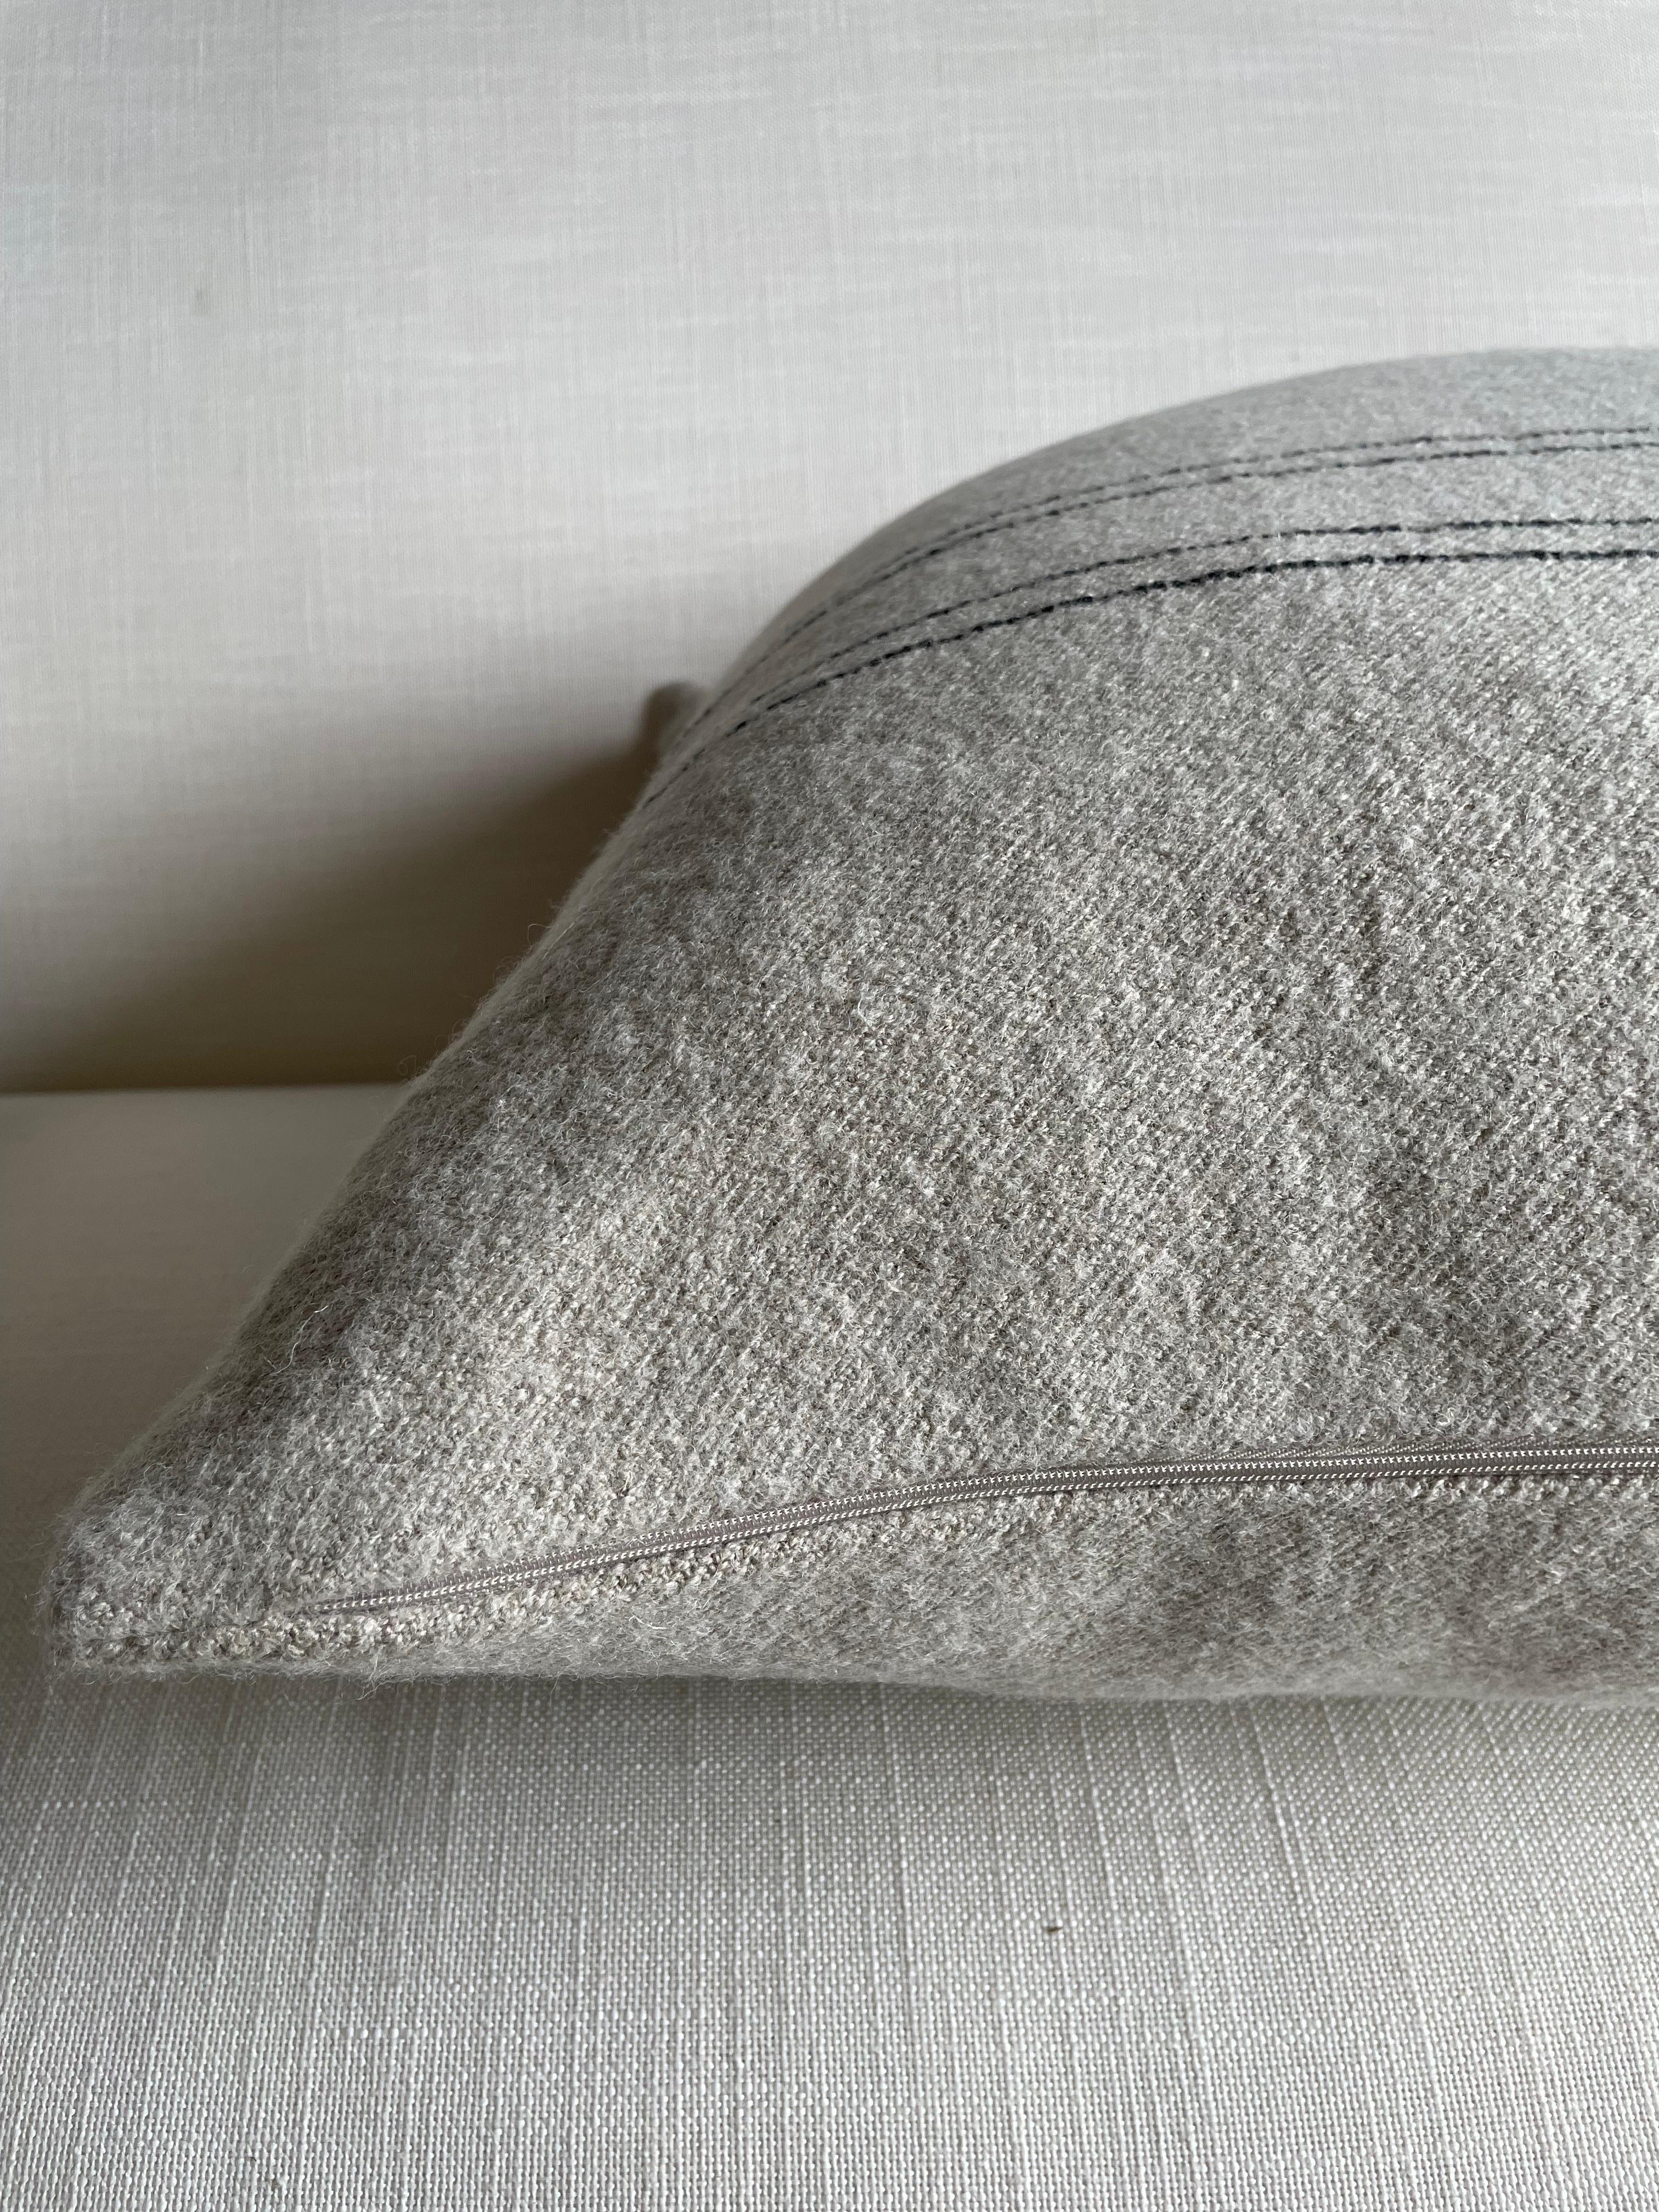 Belgian Linen and Wool Oversize Pillow Cover in Oatmeal and Coal For Sale 3